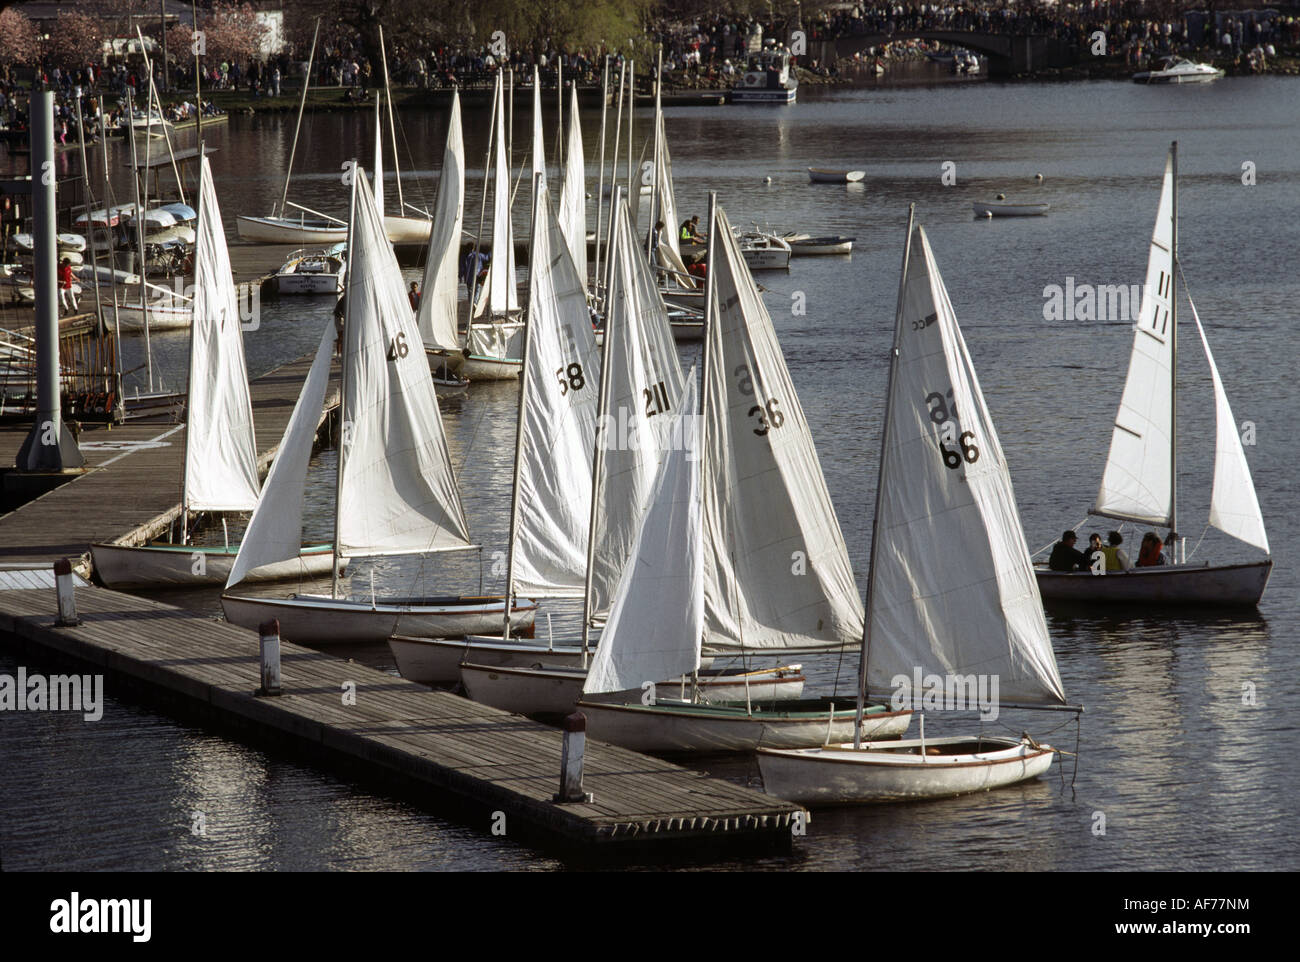 Sail boats from a community sailing club are seen at dock on the Charles  River in Boston Stock Photo - Alamy